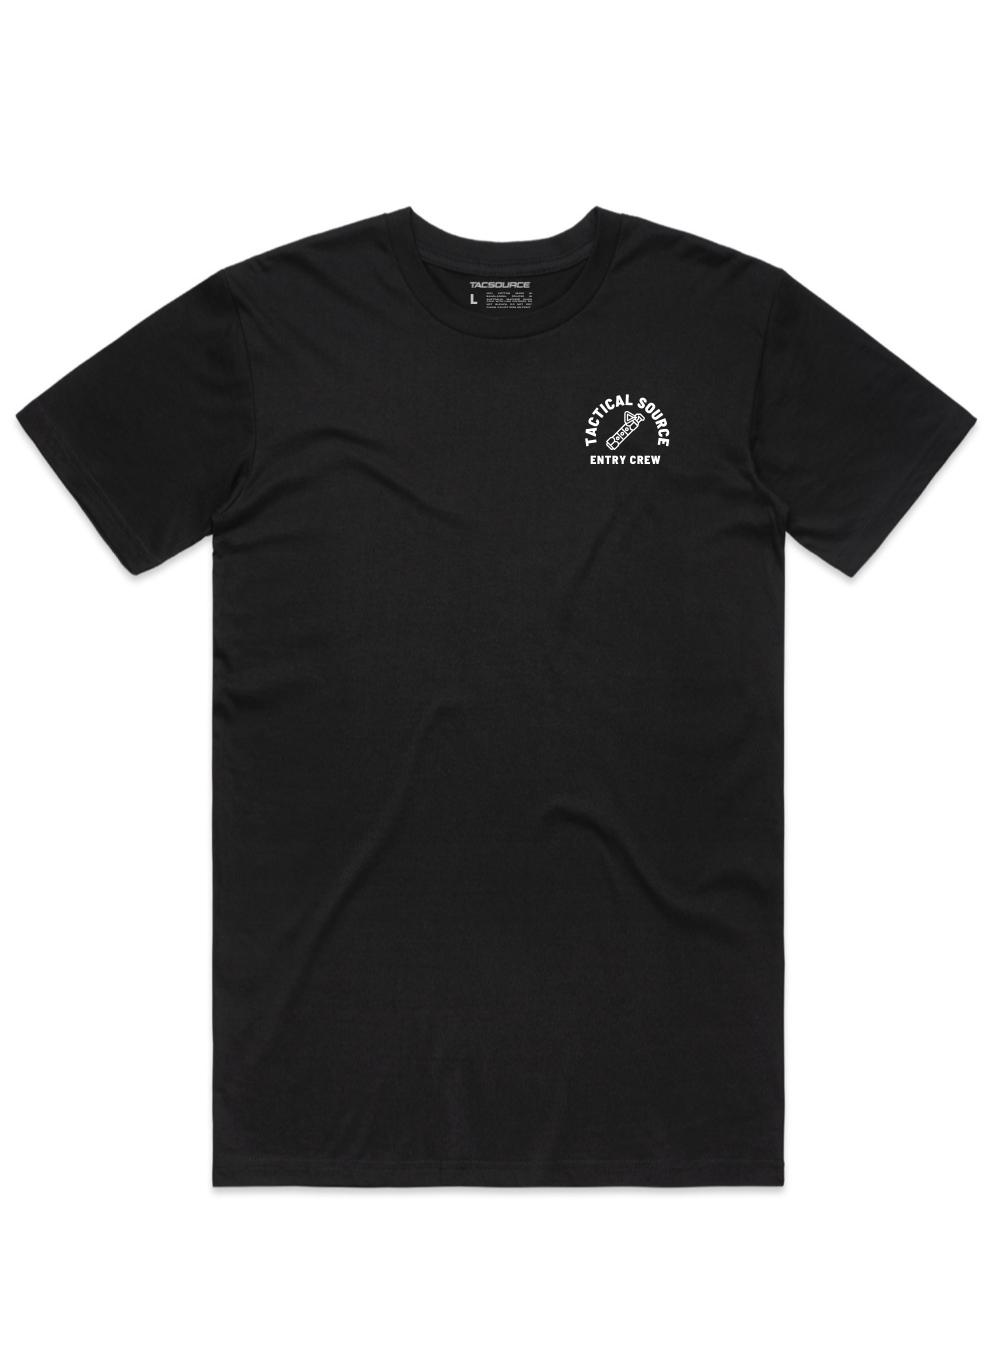 TacSource Entry Crew Flash Tee